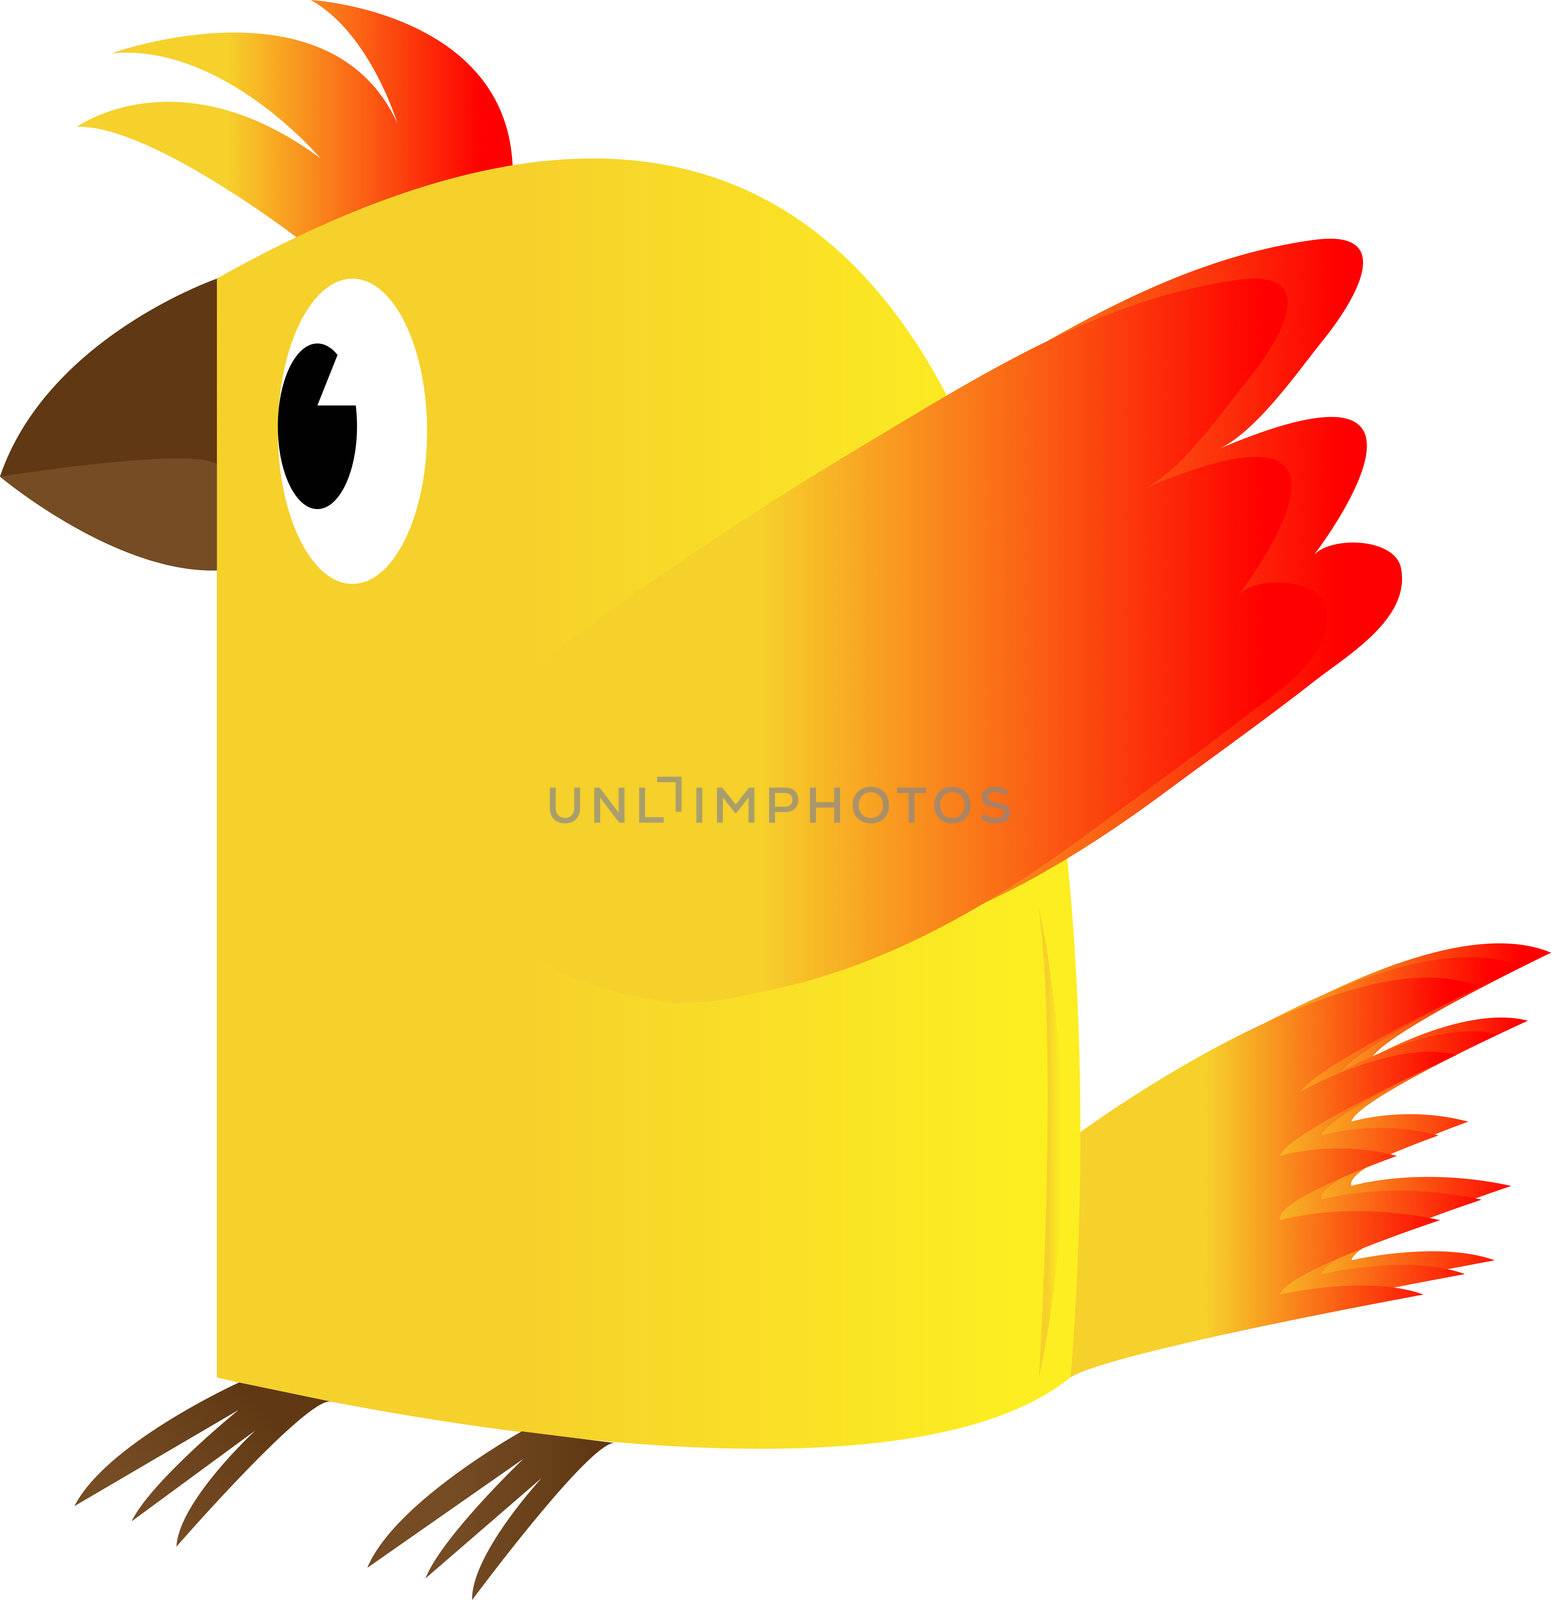 Chicken on a white background.
Vector drawing.